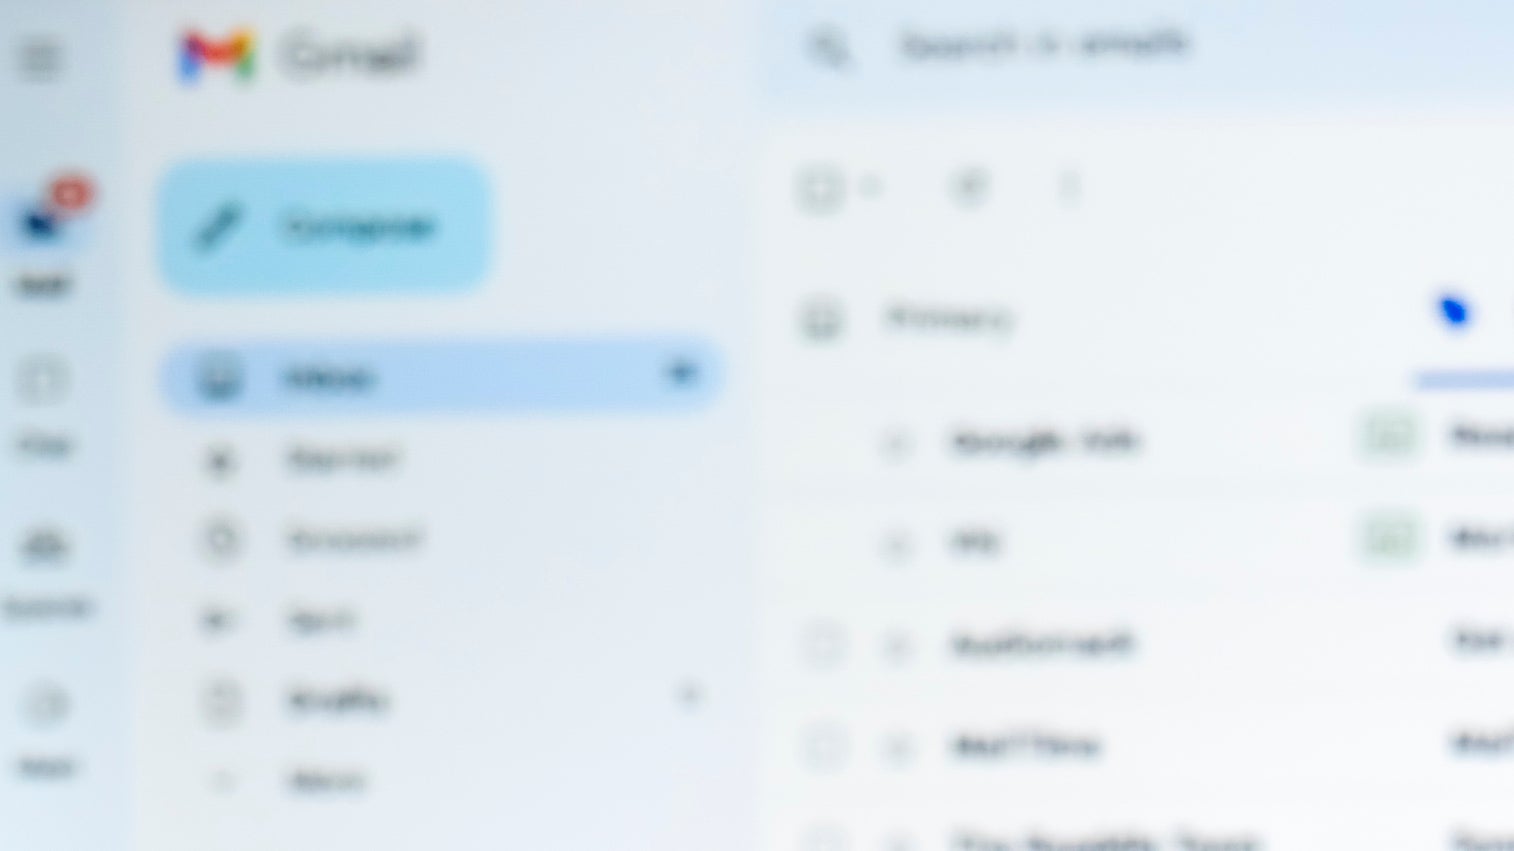 Gmail&#x27;s blurred website interface